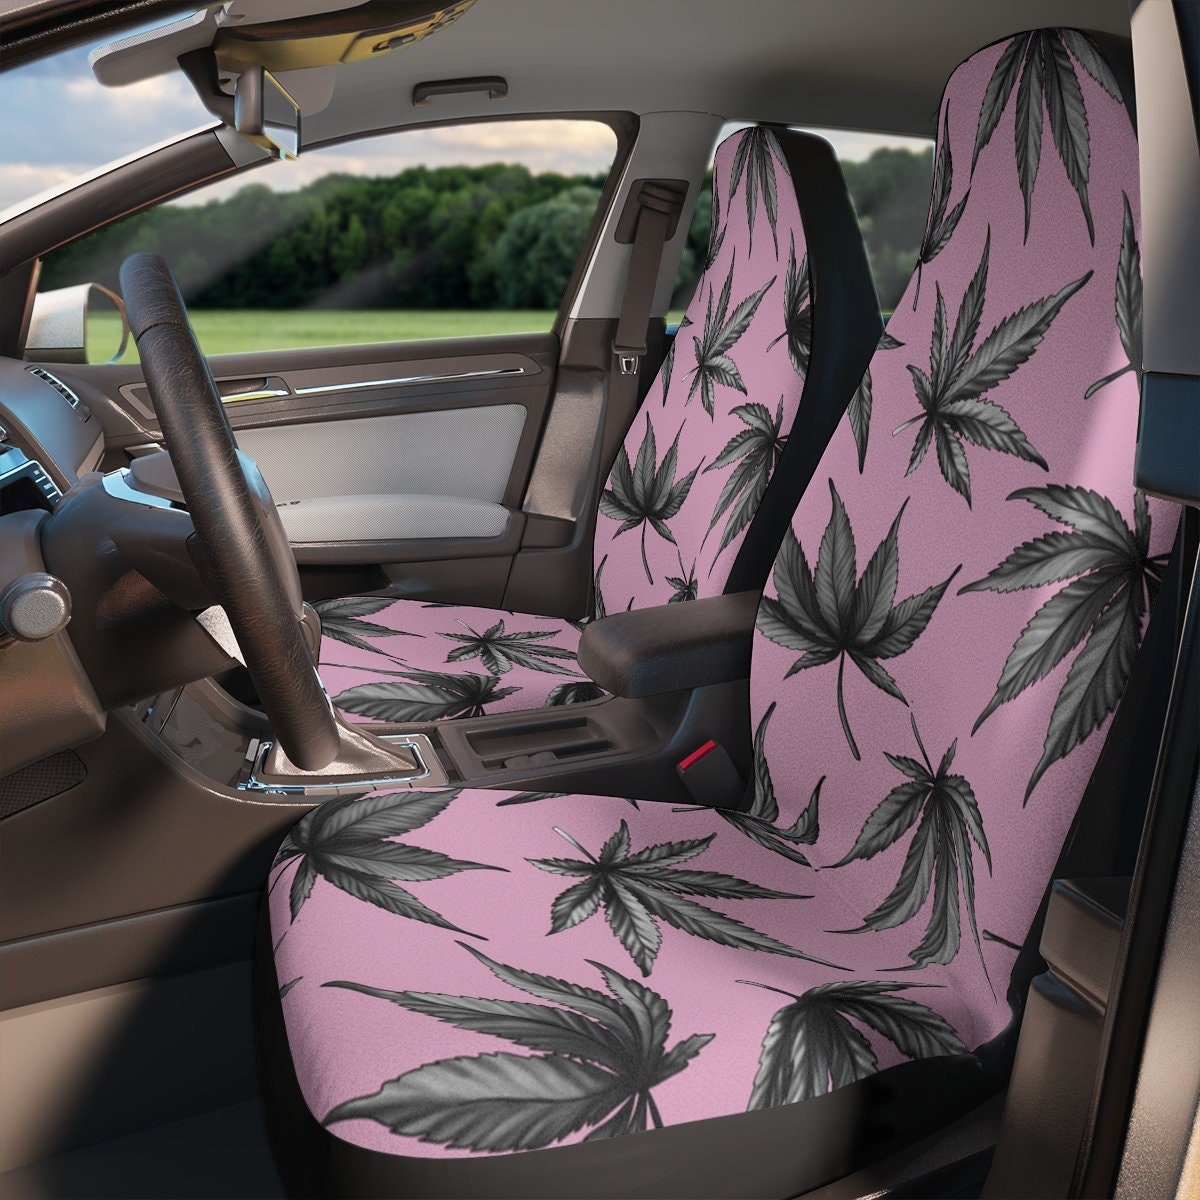 Car Seat Covers, Weed Leaf Car Accessories for Women, Pink Hippie